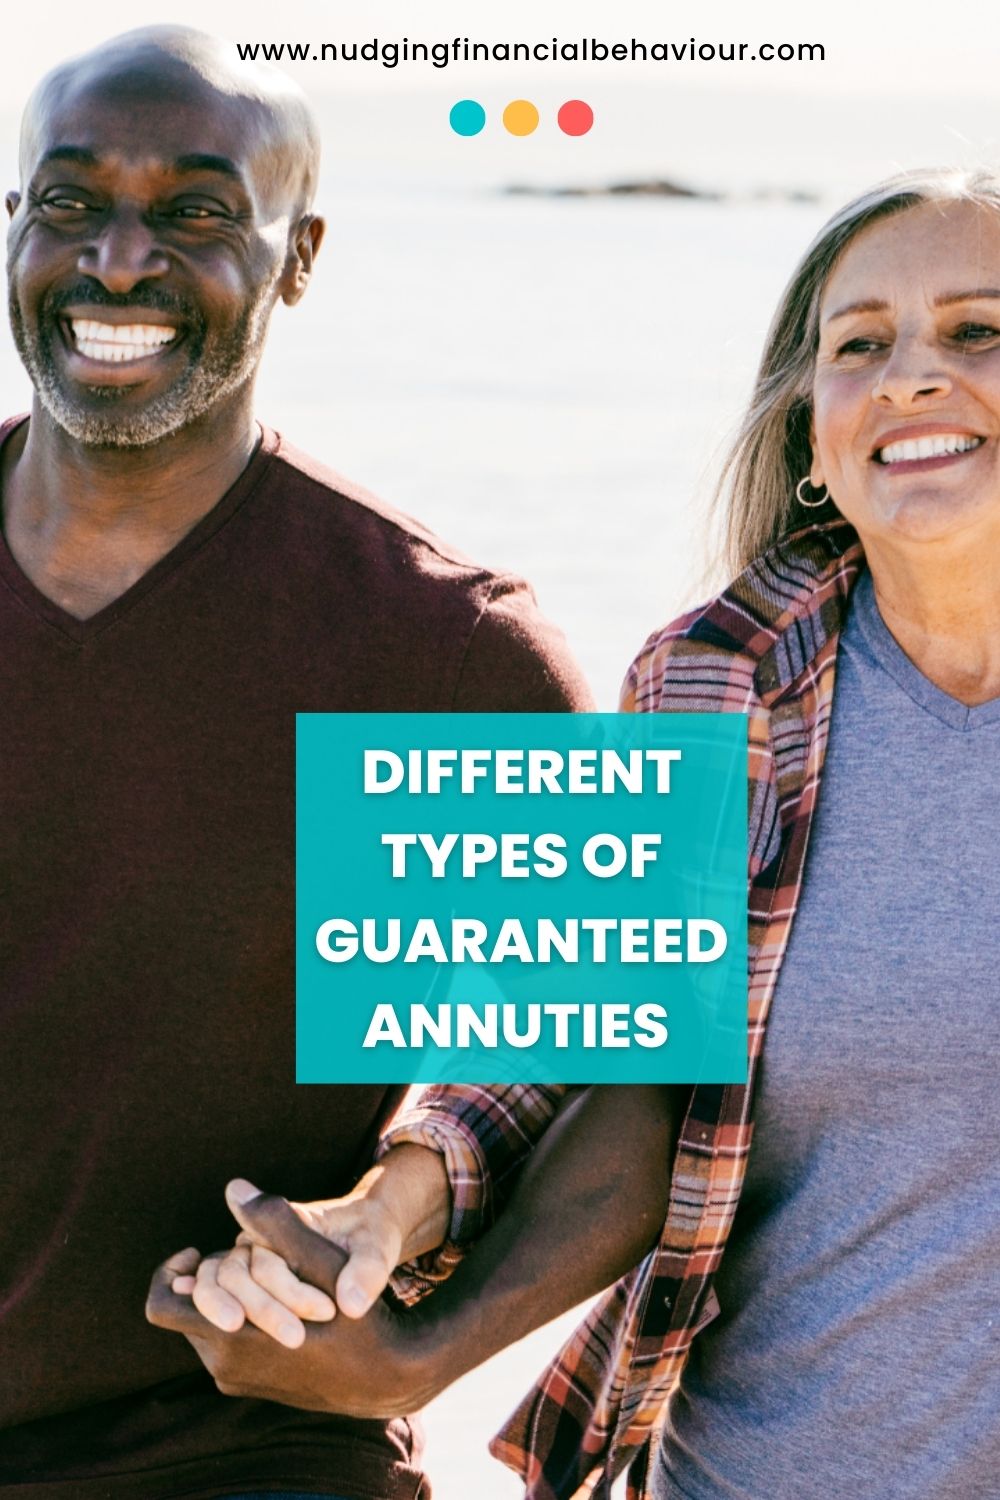 Different types of guaranteed annuities